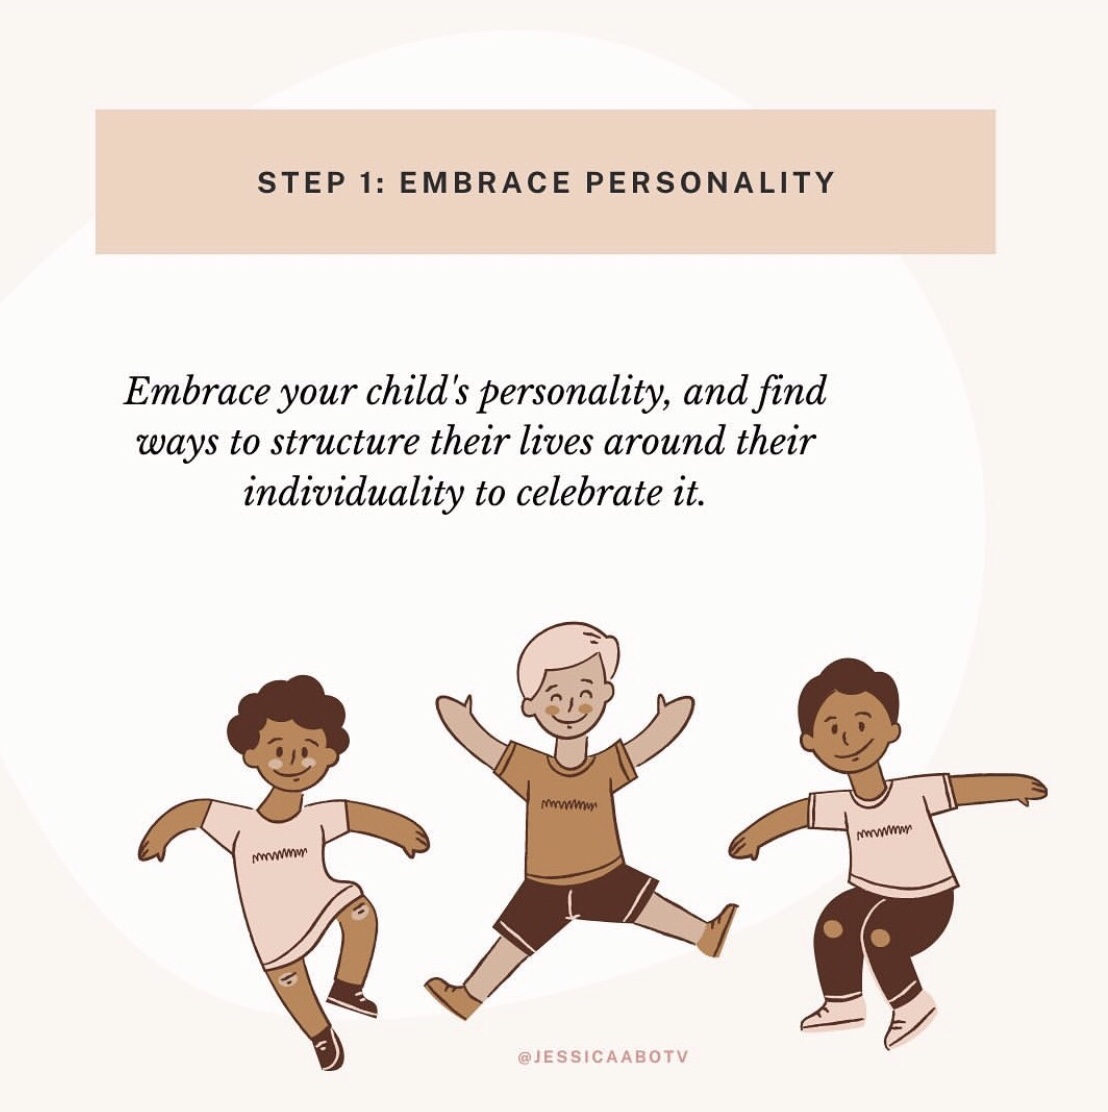 5 tips to Empower your children - Twindollicious